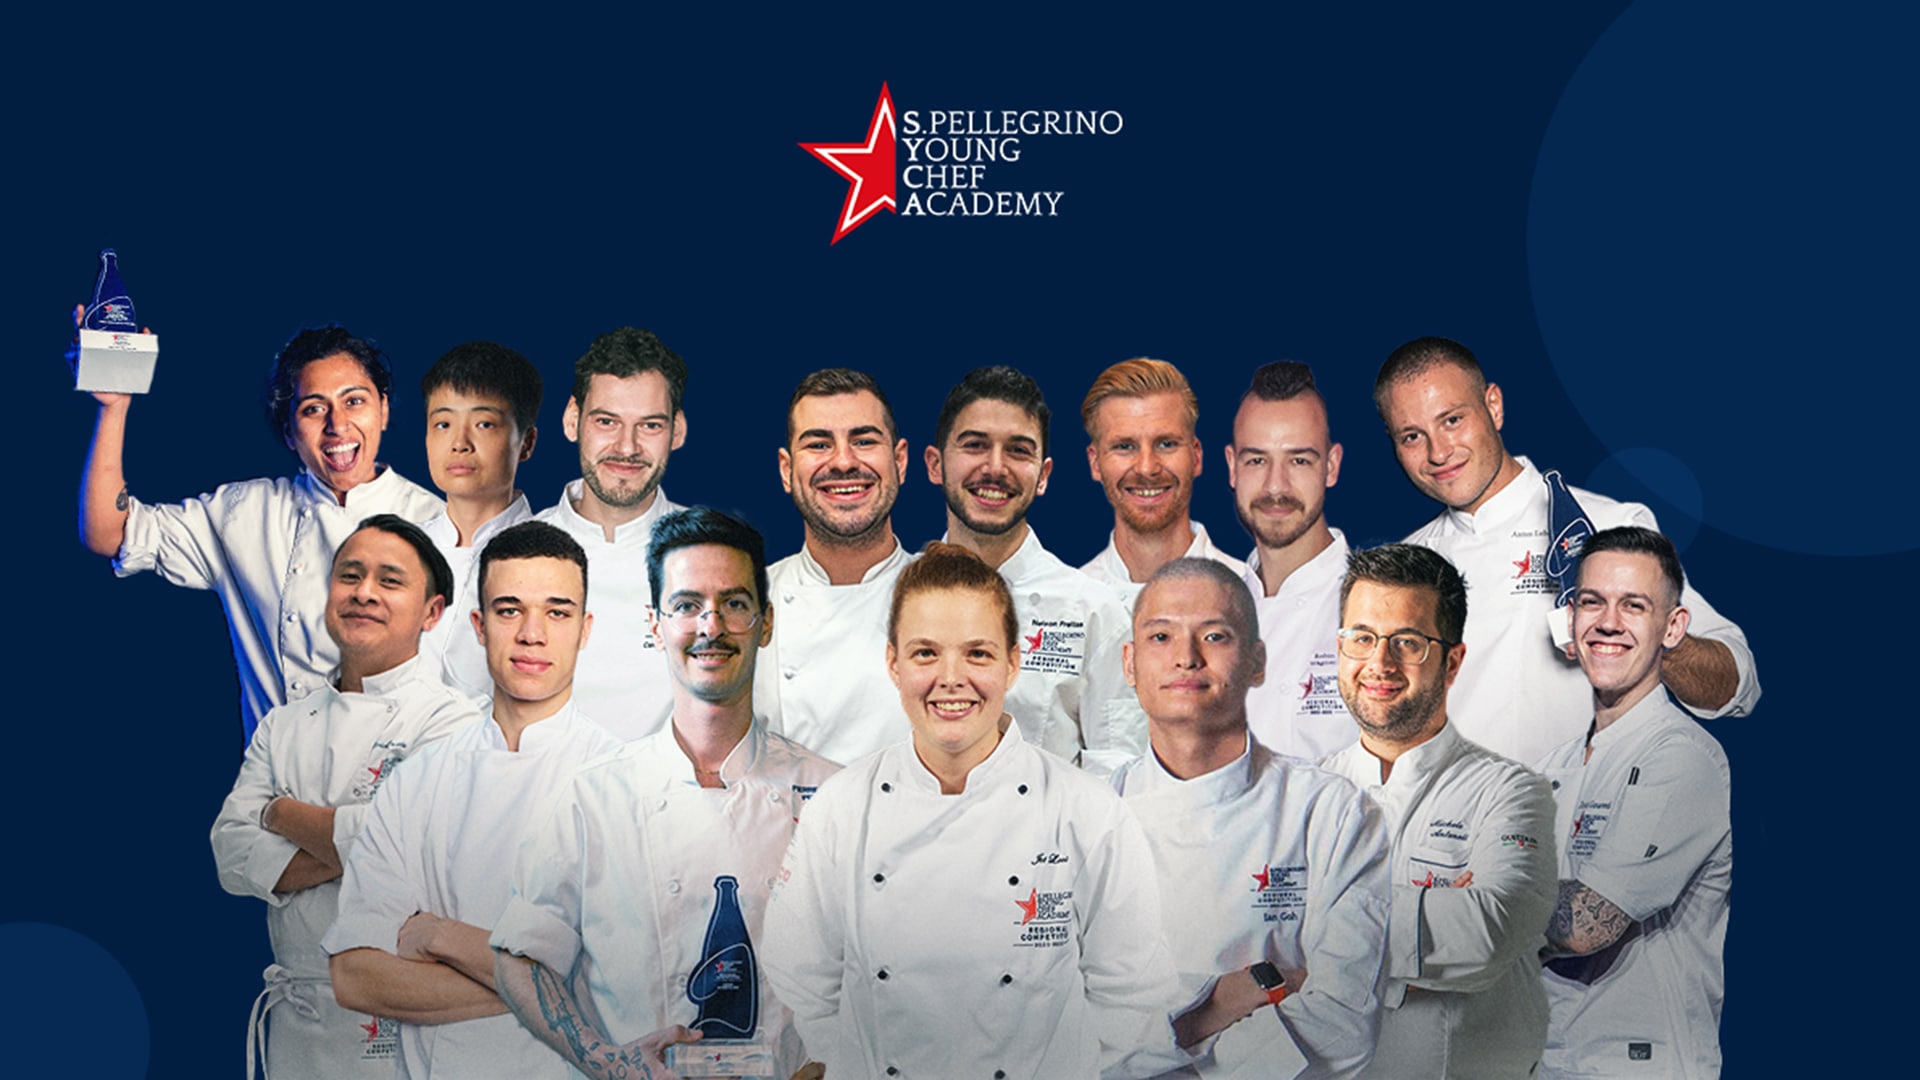 The 15 regional finalists for the 2022-23 edition of the S.Pellegrino Young Chef Academy Competition